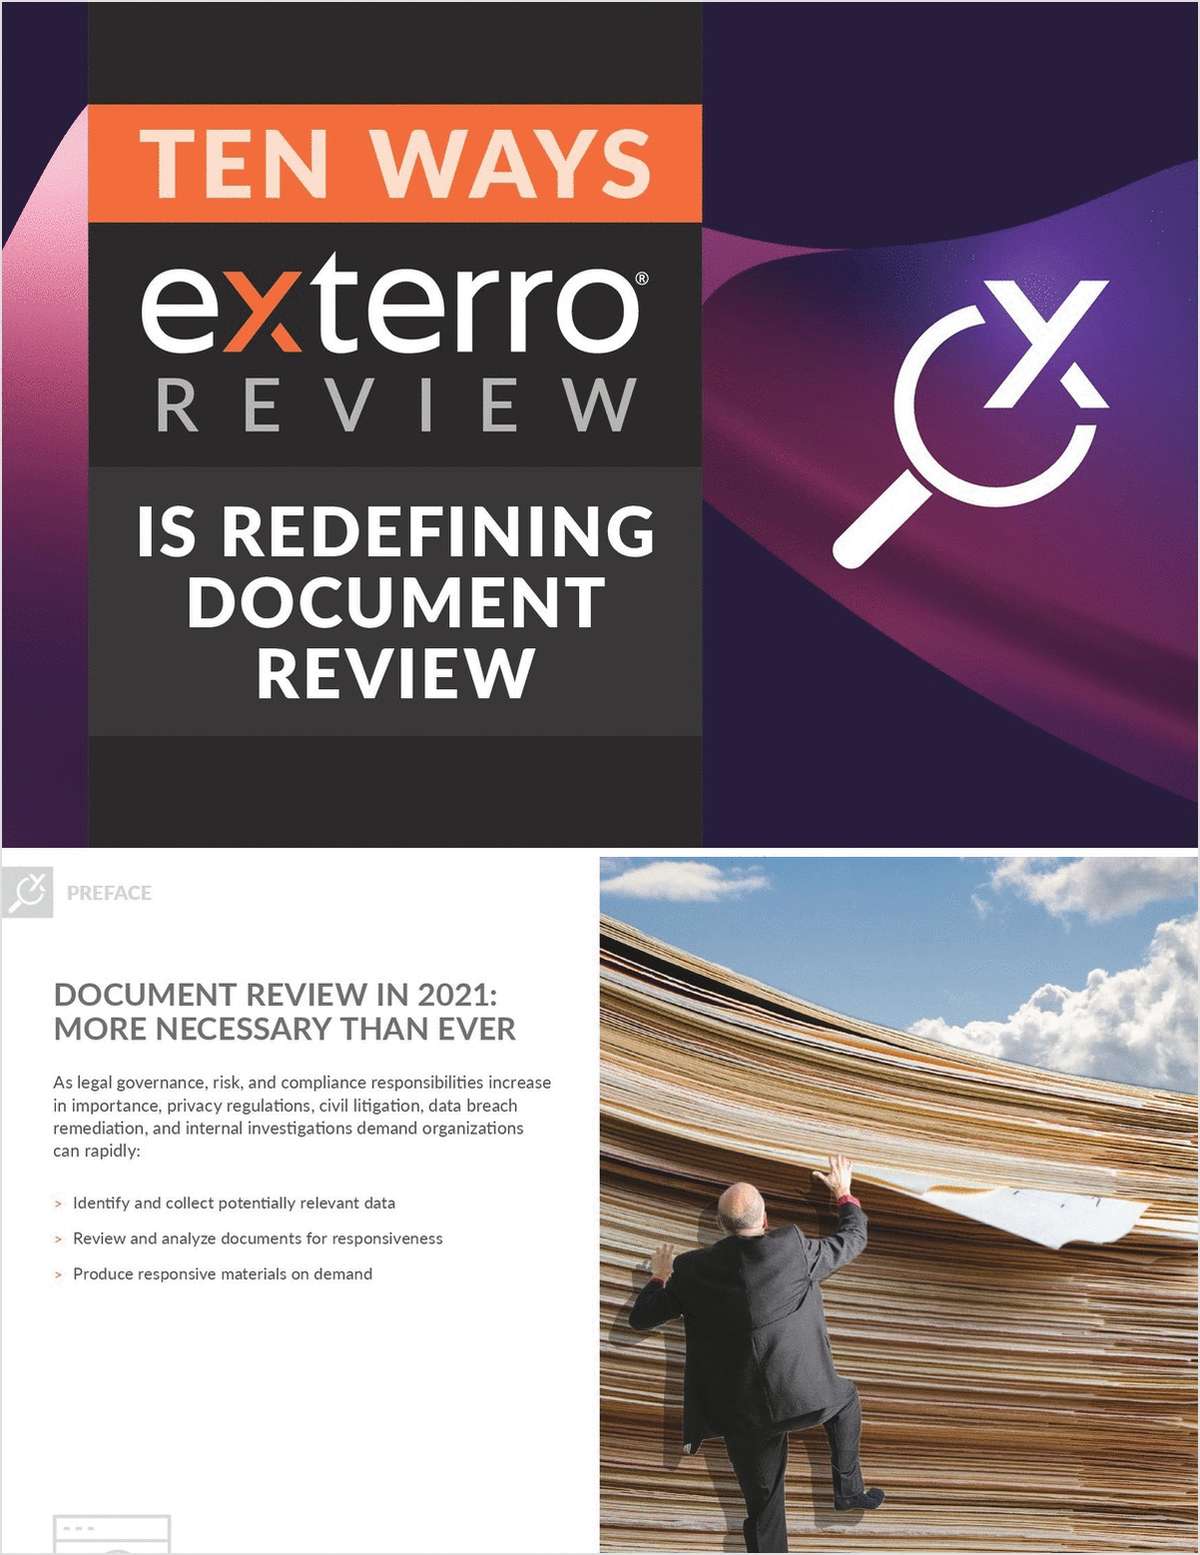 Download this white paper and learn new ways to ensure document review is secure in the face of increasing threats while improving efficiency and transparency.